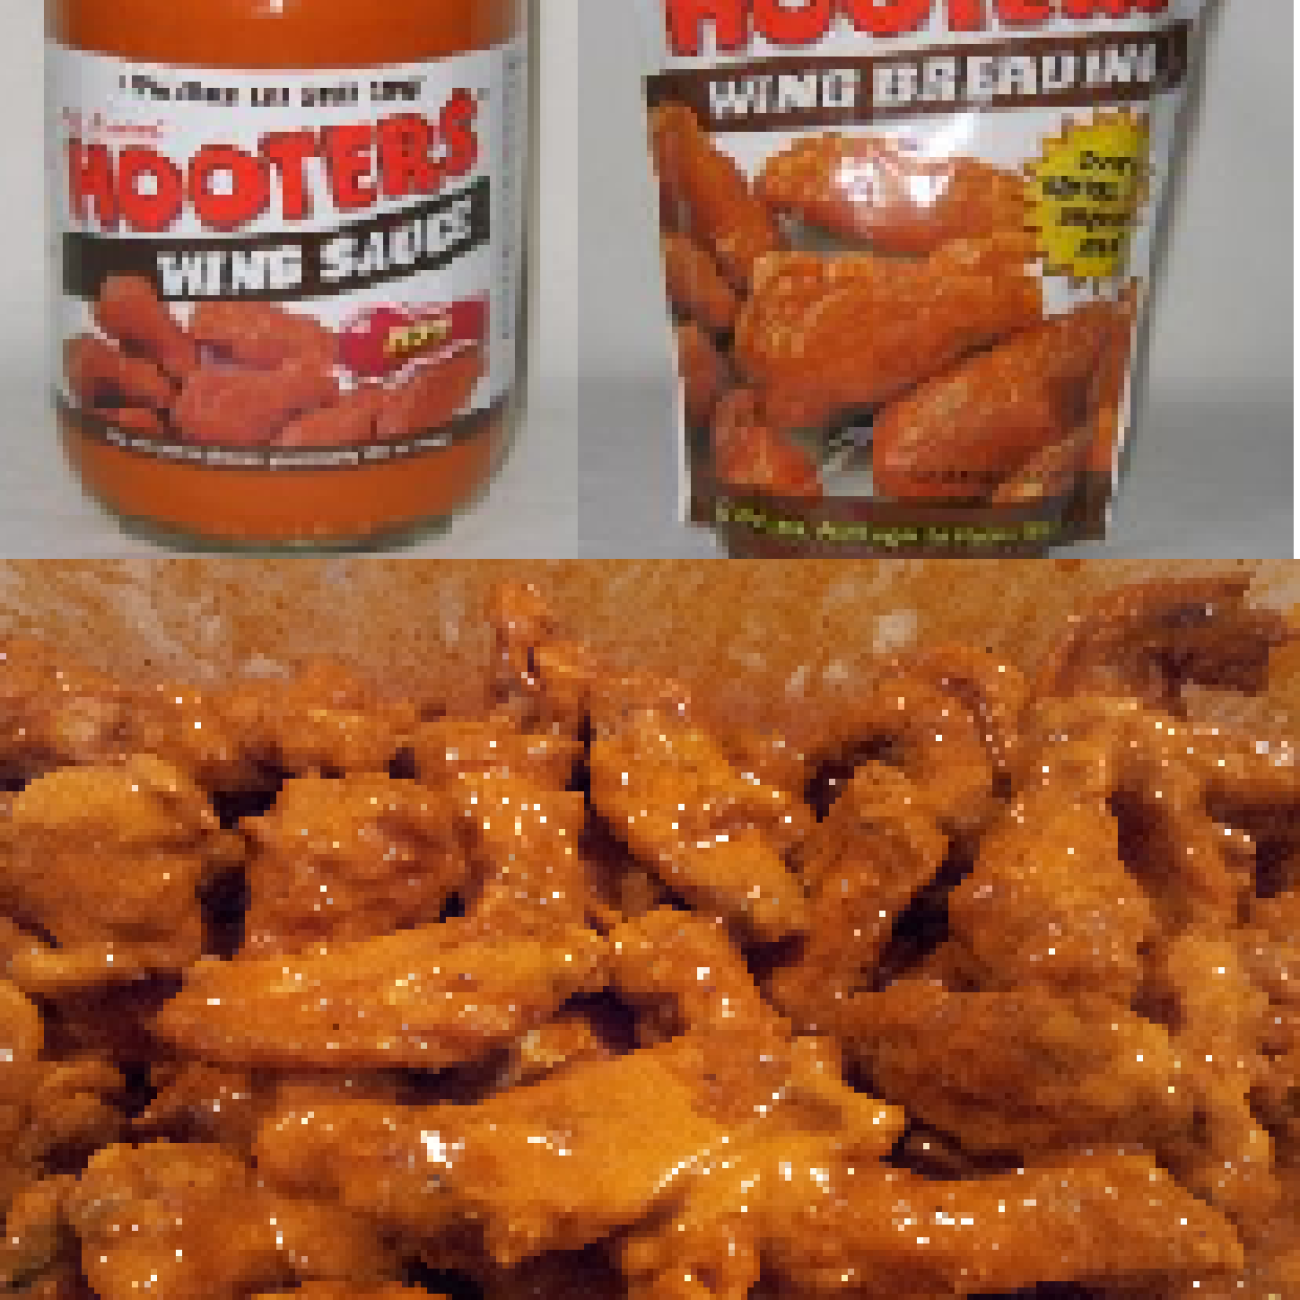 Best Hooters Hot Wing Sauce And Breading